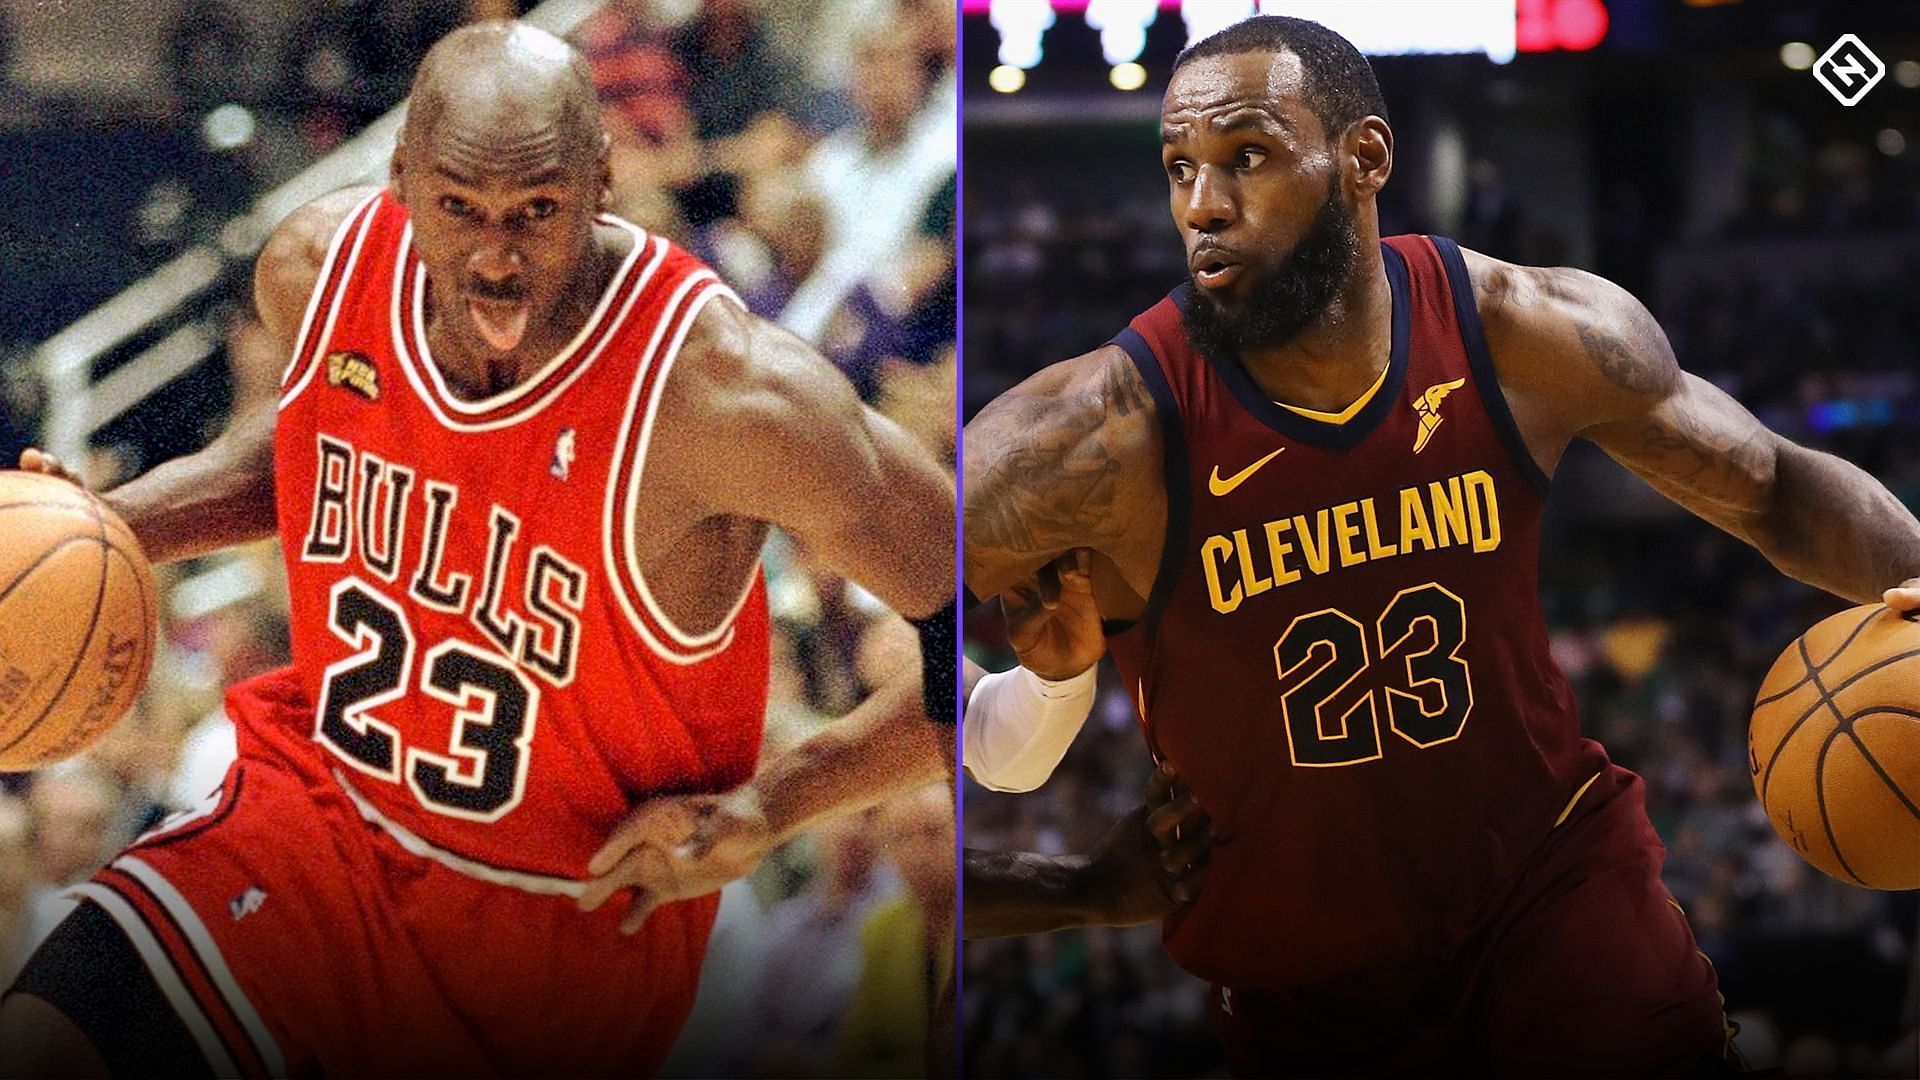 LeBron James is still going after Michael Jordan&#039;s 6 NBA rings. [Photo: Sporting News]